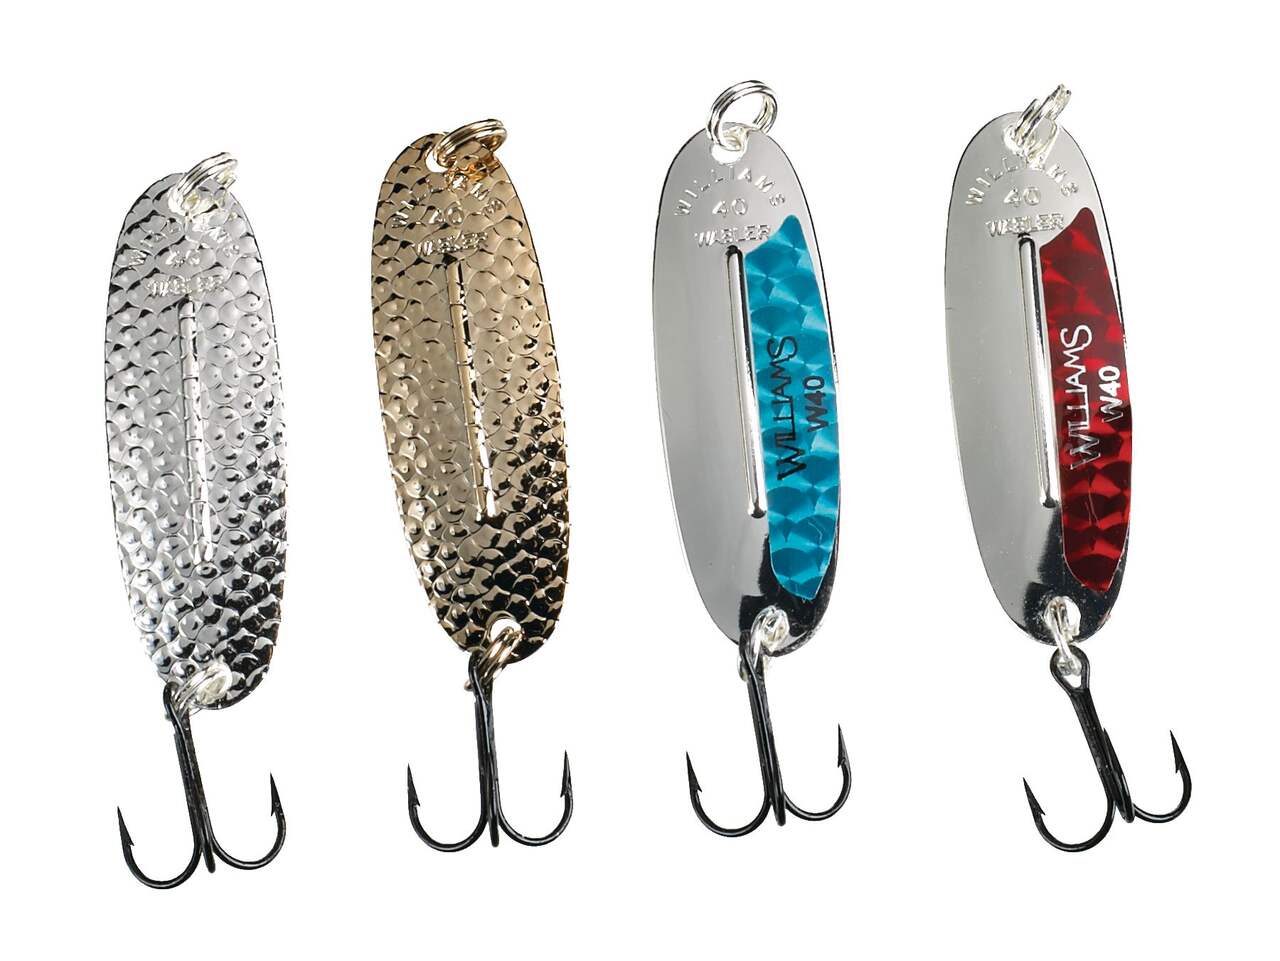 https://media-www.canadiantire.ca/product/playing/fishing/fishing-lures/0782126/williams-trout-wabler-lure-kit-assorted-4-pack-8720680a-ecc0-4766-af04-d4443fce9bca-jpgrendition.jpg?imdensity=1&imwidth=640&impolicy=mZoom